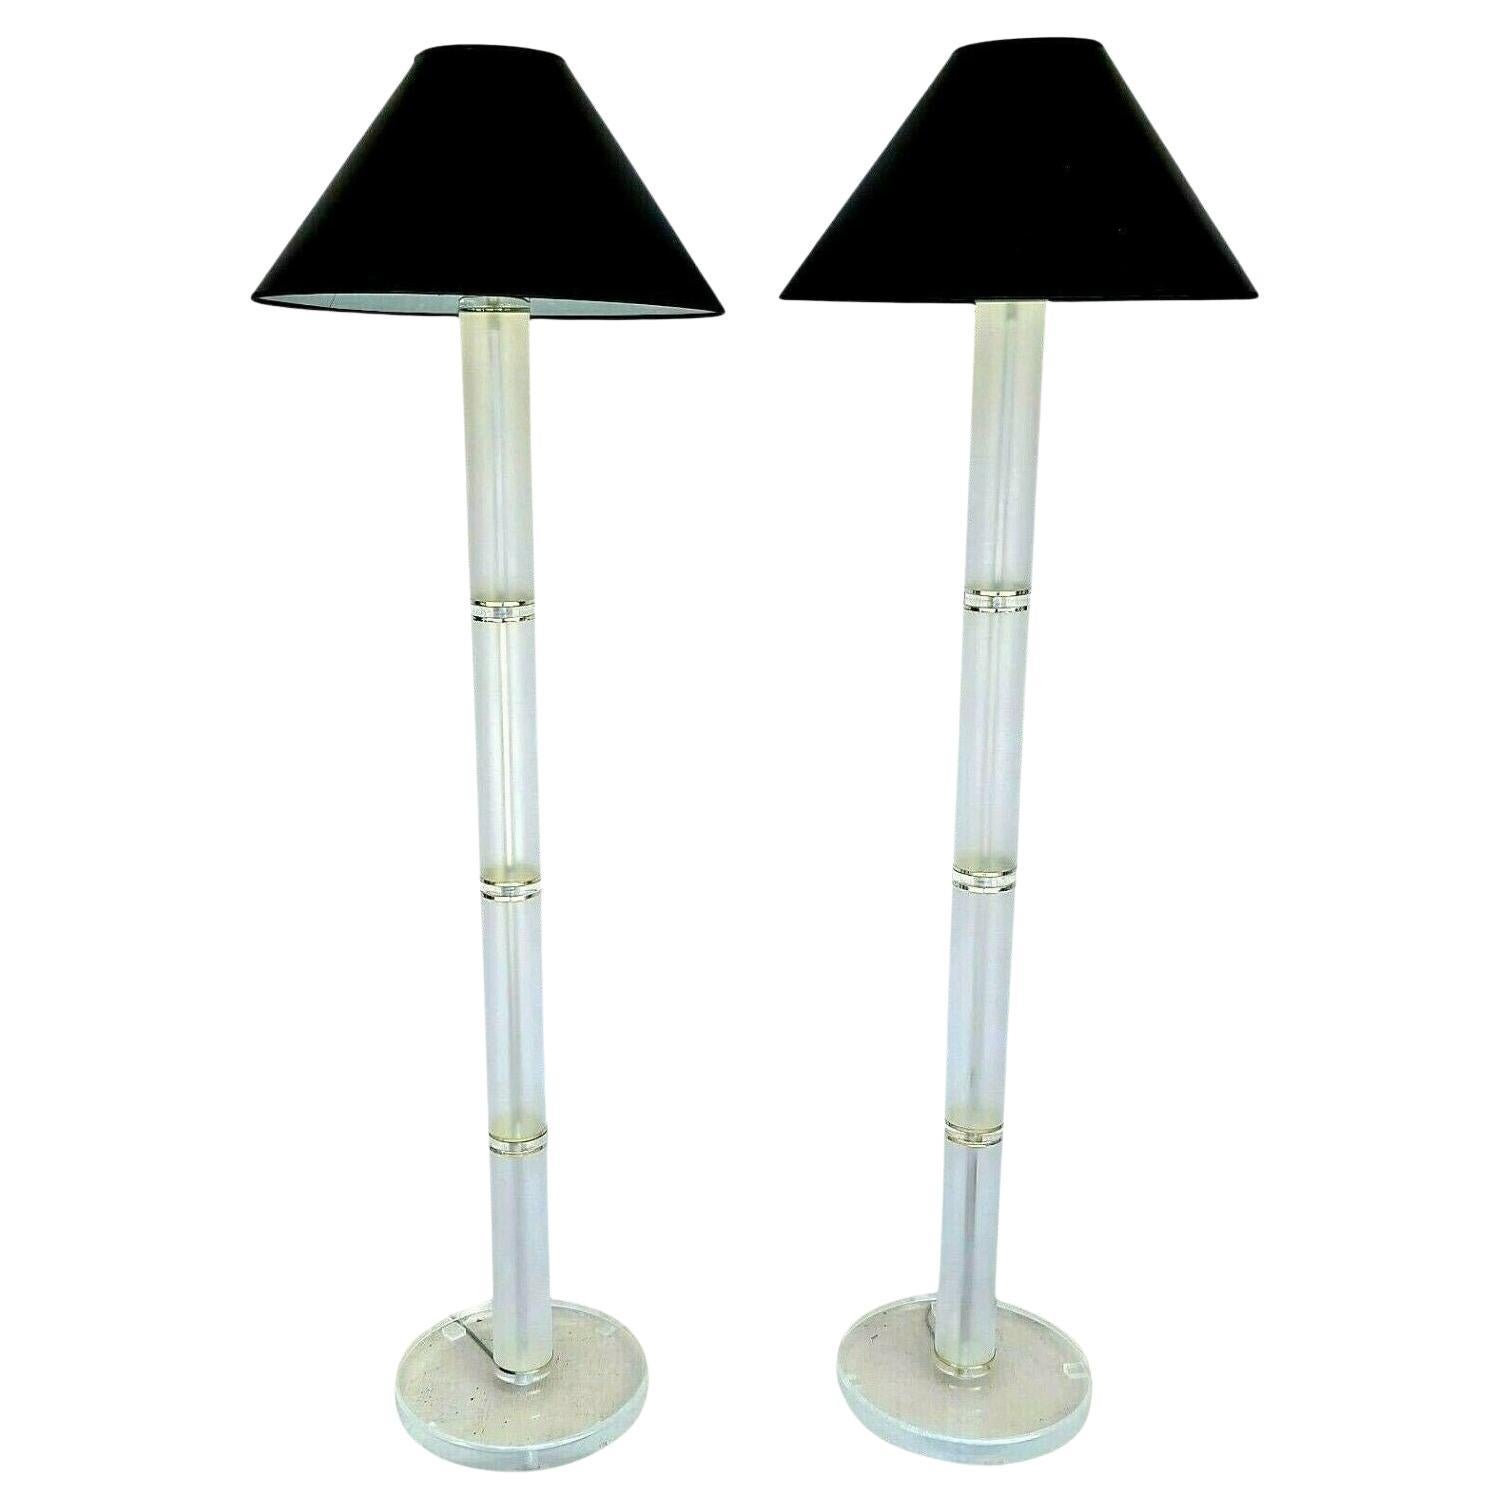 1970s Mid-Century Modern Optique Style Lucite & Brass Floor Lamps, a Pair For Sale